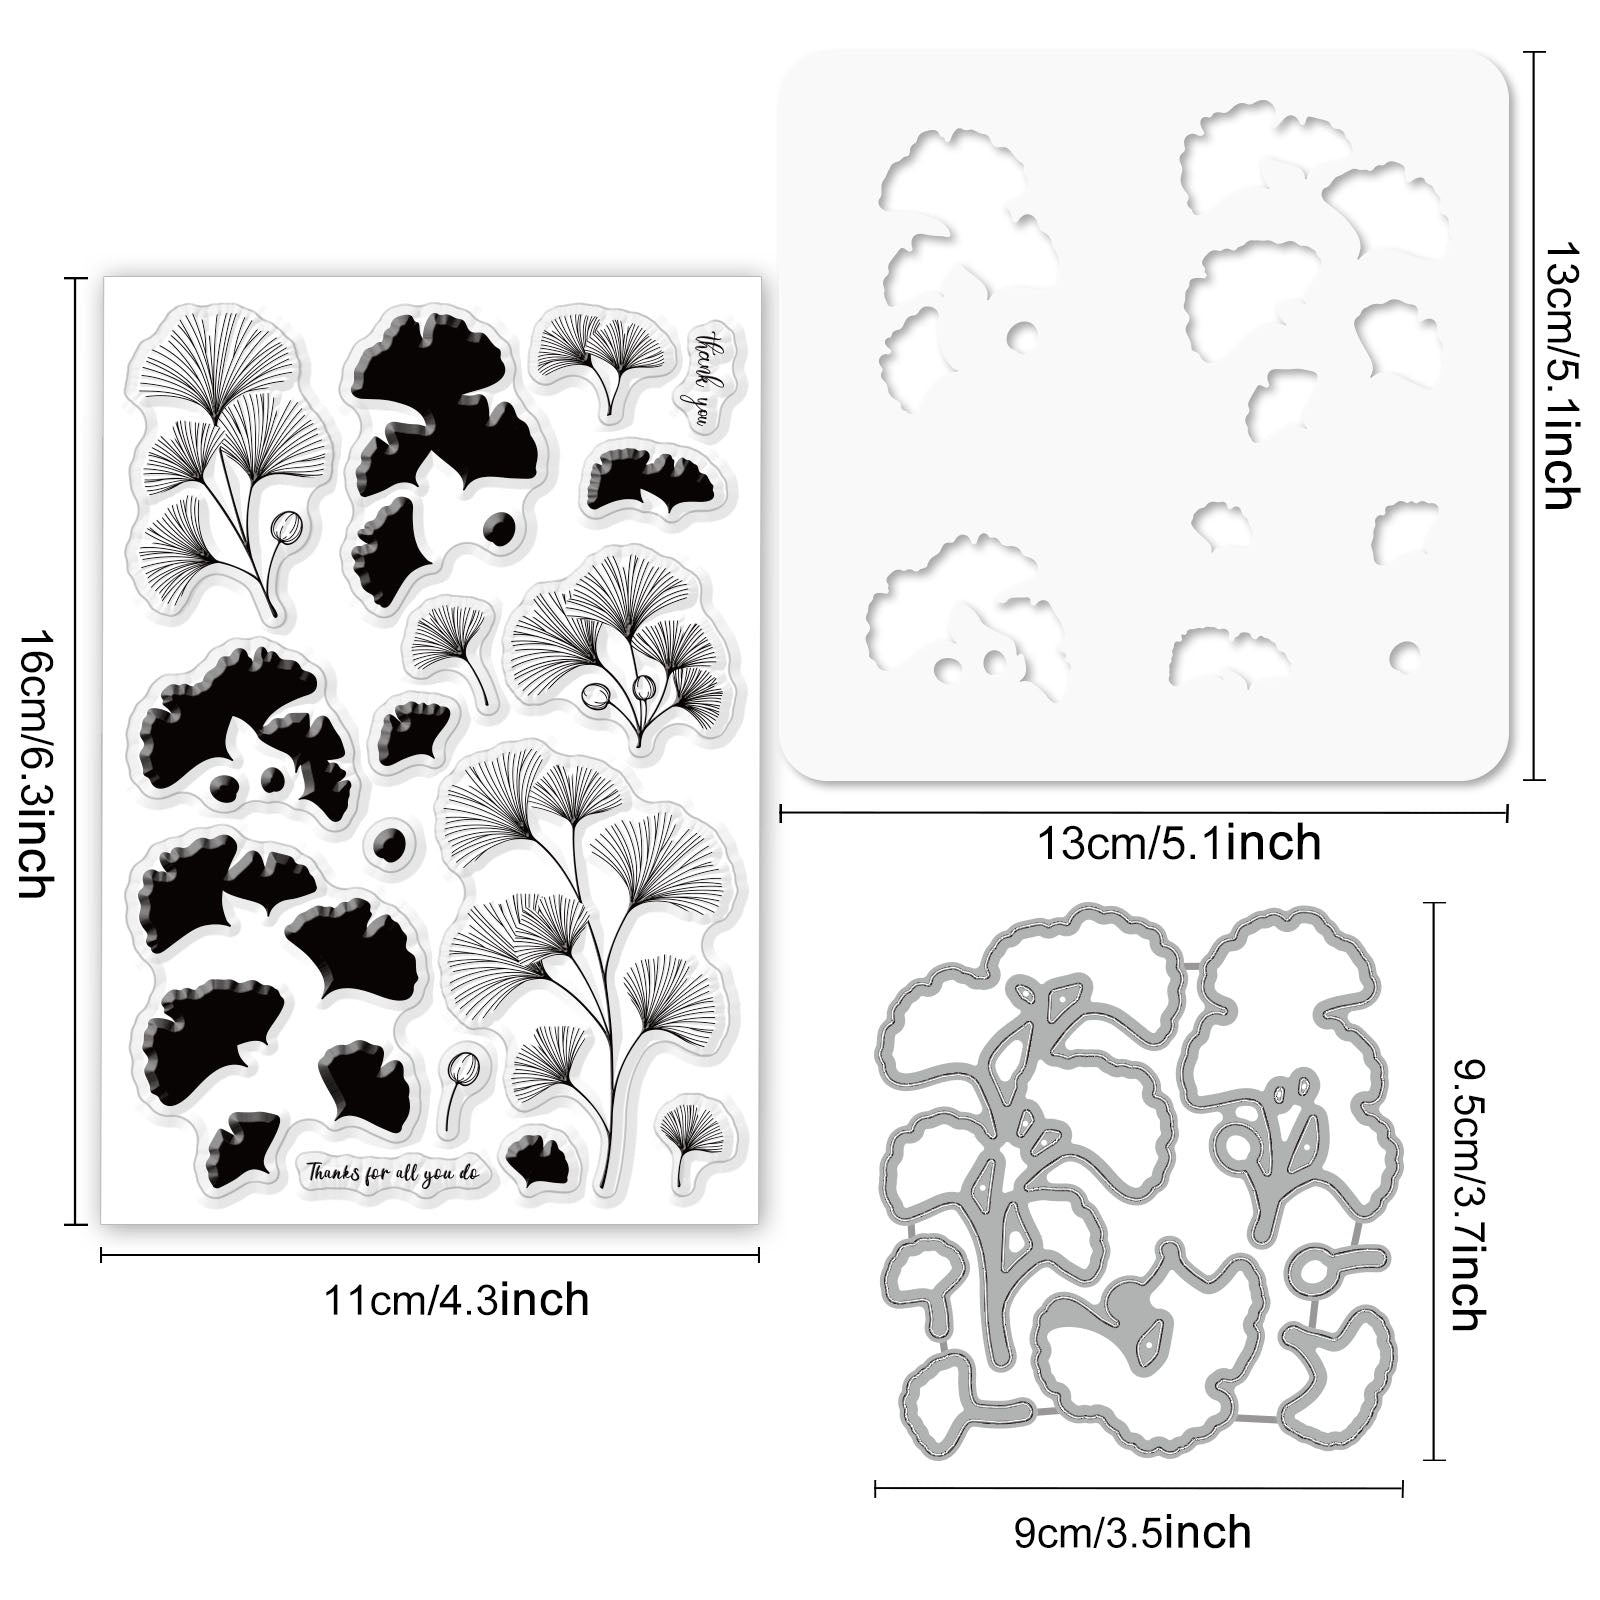 Globleland Ginkgo Biloba, Leaf, Cutting Dies, Painting Stencils and Silicone Clear Stamps Set, for DIY Scrapbooking/Photo Album, Decorative Embossing DIY Paper Card